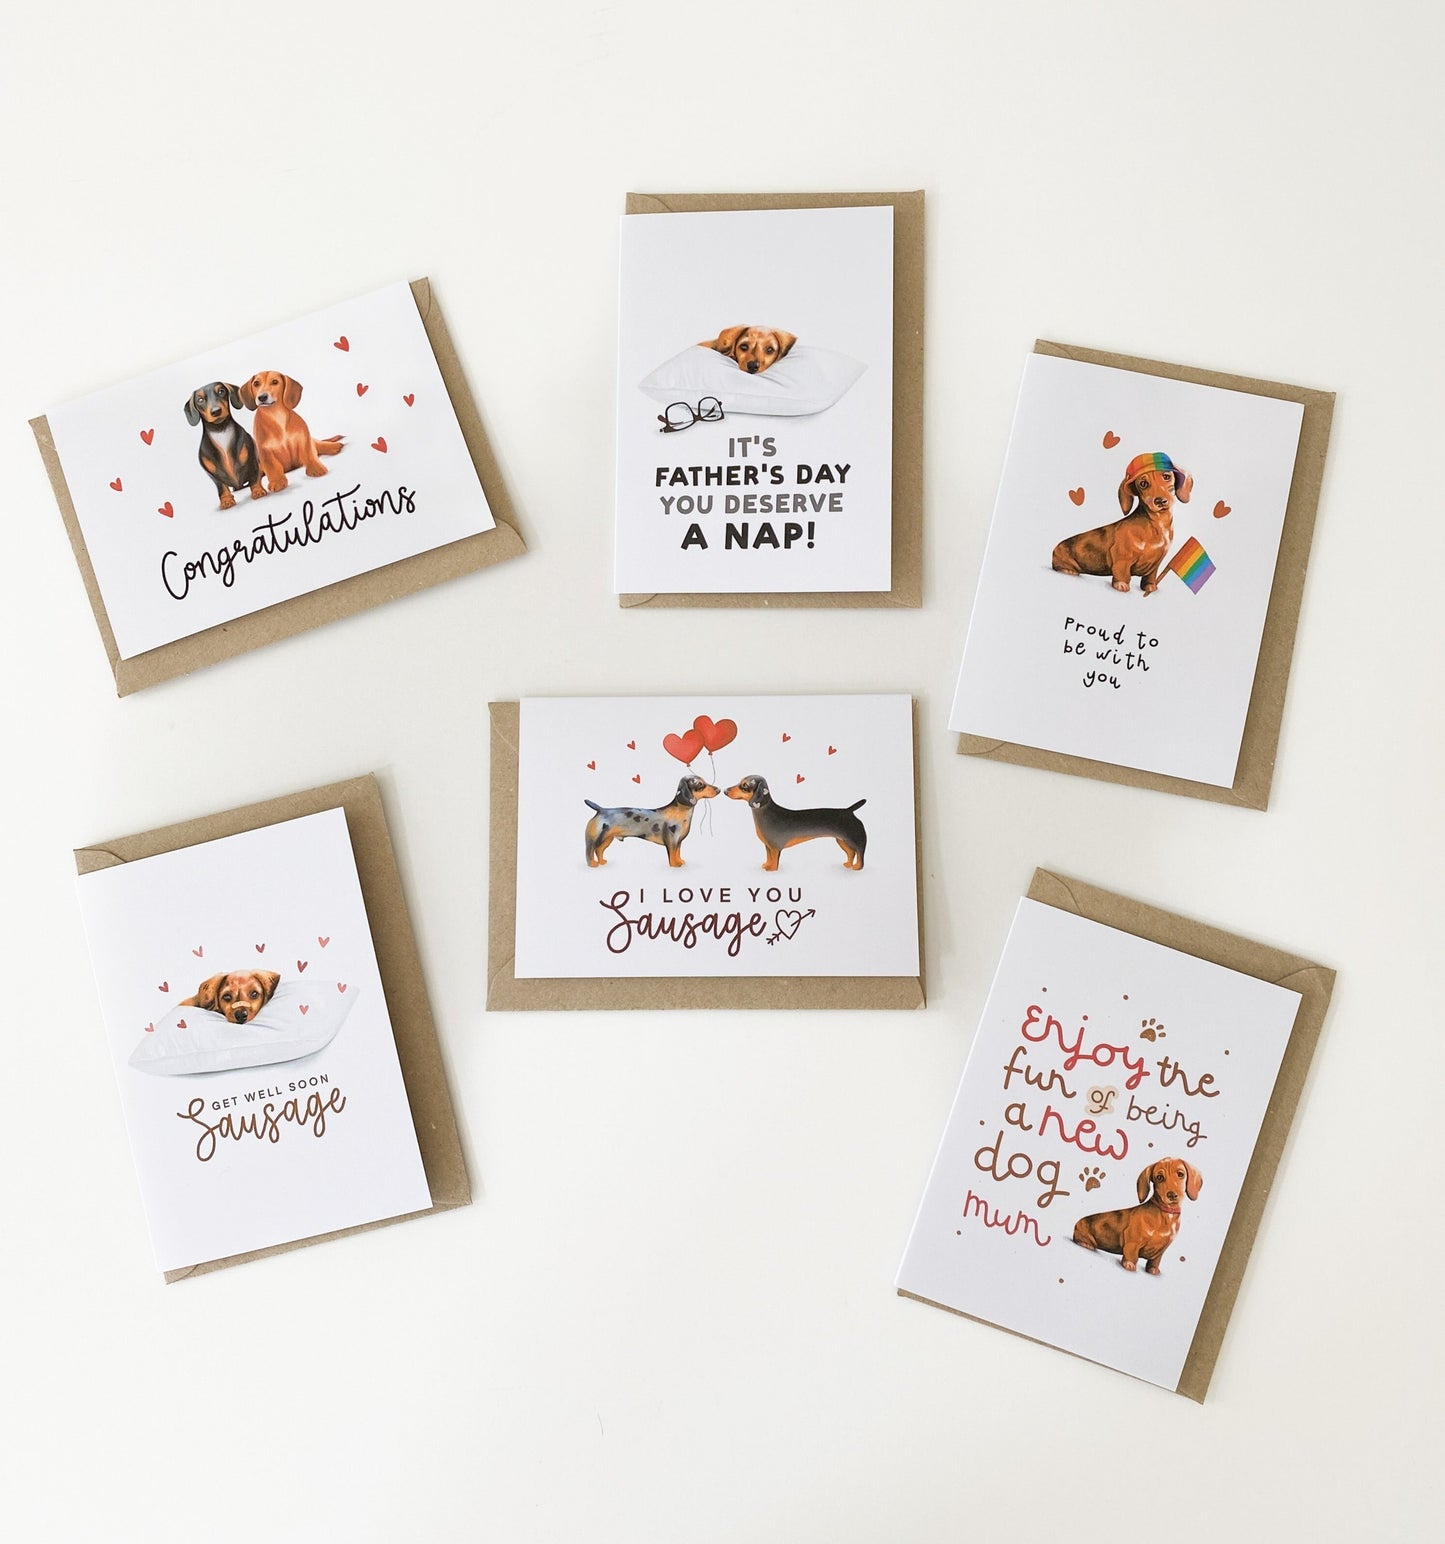 Dachshund father's day cards for dachshund lovers, a group of different dachshund cards for different occasions